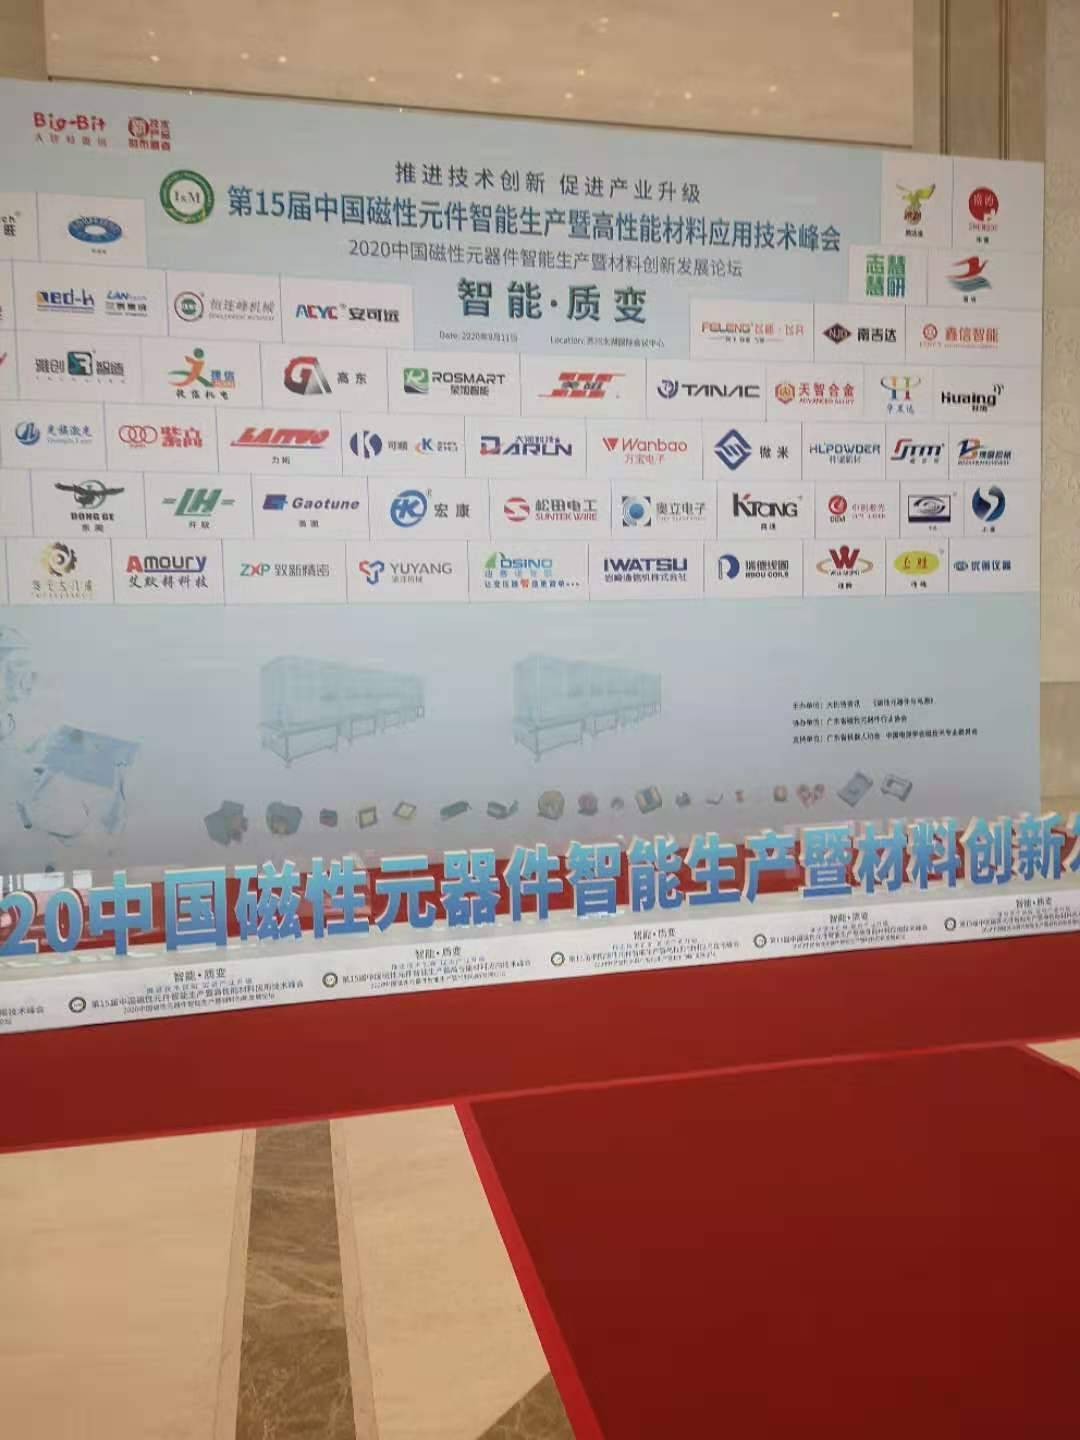 September 11, 2020 “the 15th (Suzhou) China Magnetic Component Intelligent Production and High-performance Materials Application Technology Summit”